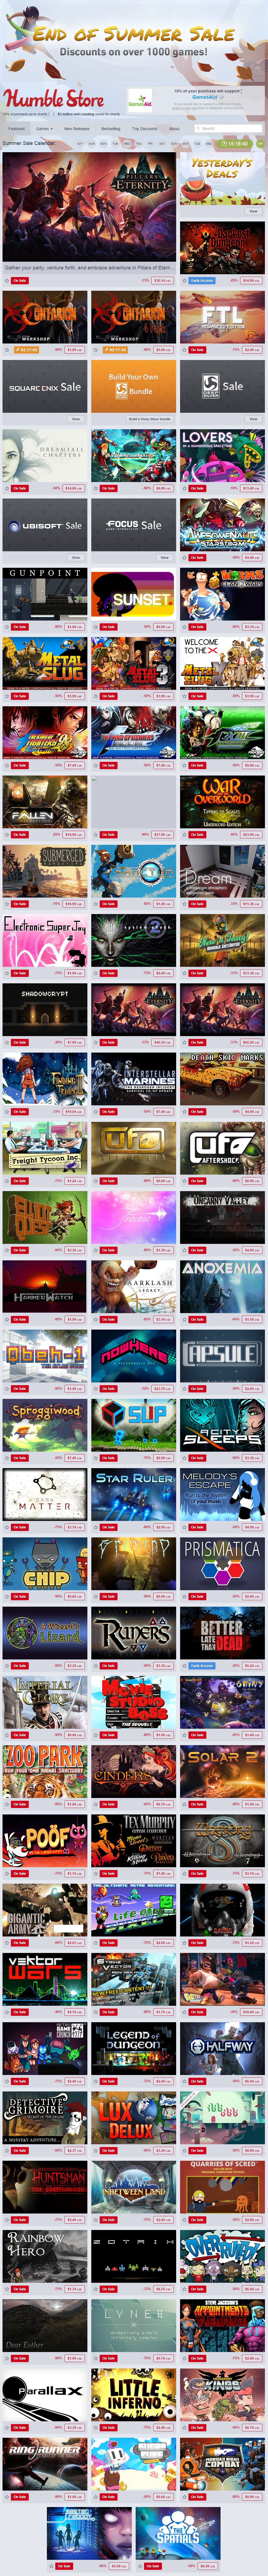 'The Humble Store_ Great games_ Fantastic prices_ Support charity_' - www_humblebundle_com_store.jpg